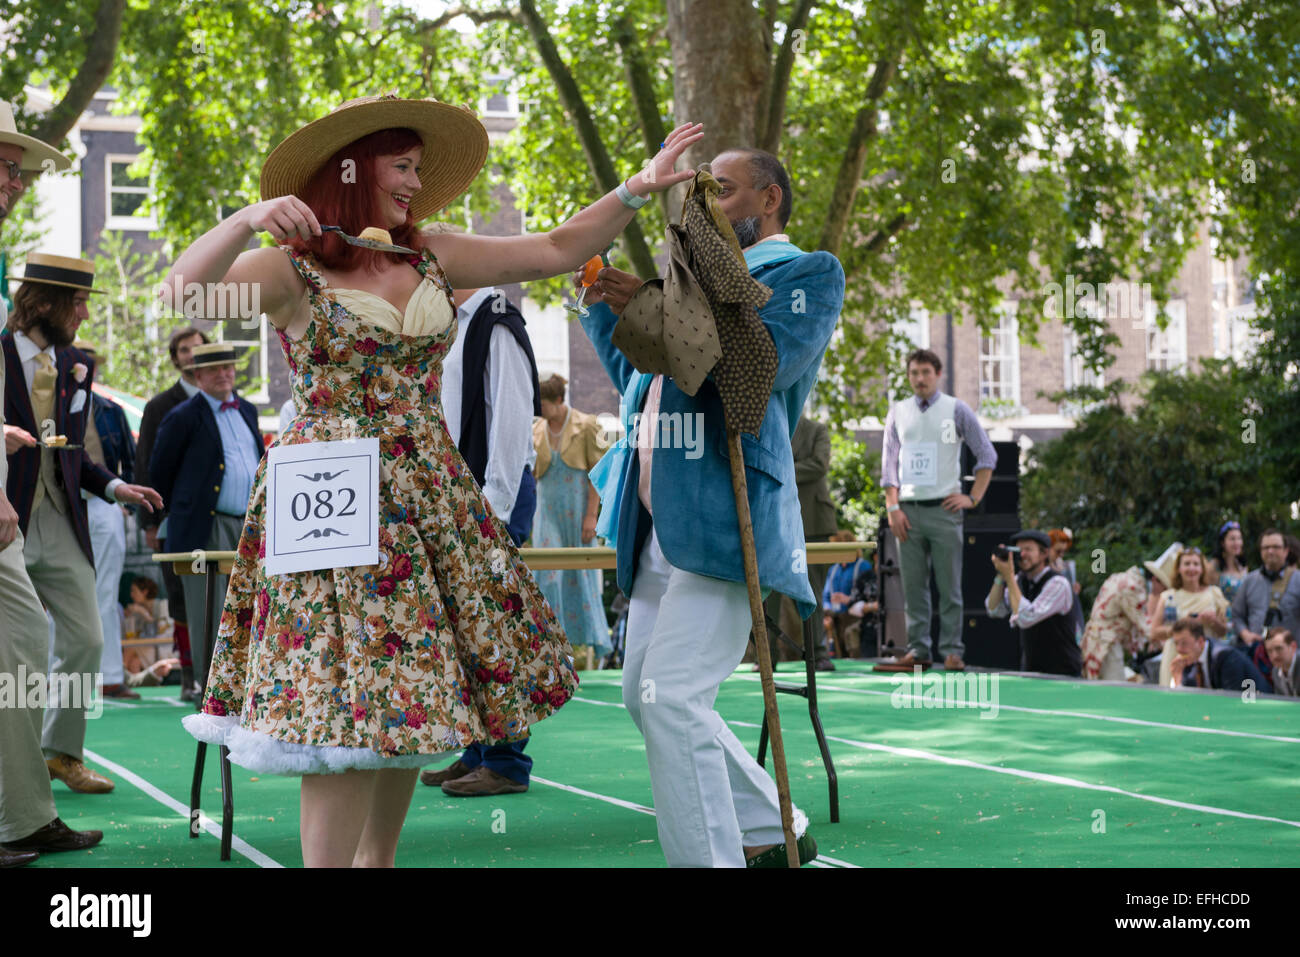 The 10 Anniversary of the Chap Olympiad. A sartorial gathering of chaps and chapesses in Bloomsbury London. Here people take part in the  Bakewell Battles - fighting to make each other drop  slices of Bakewell Tarts, London, England Stock Photo